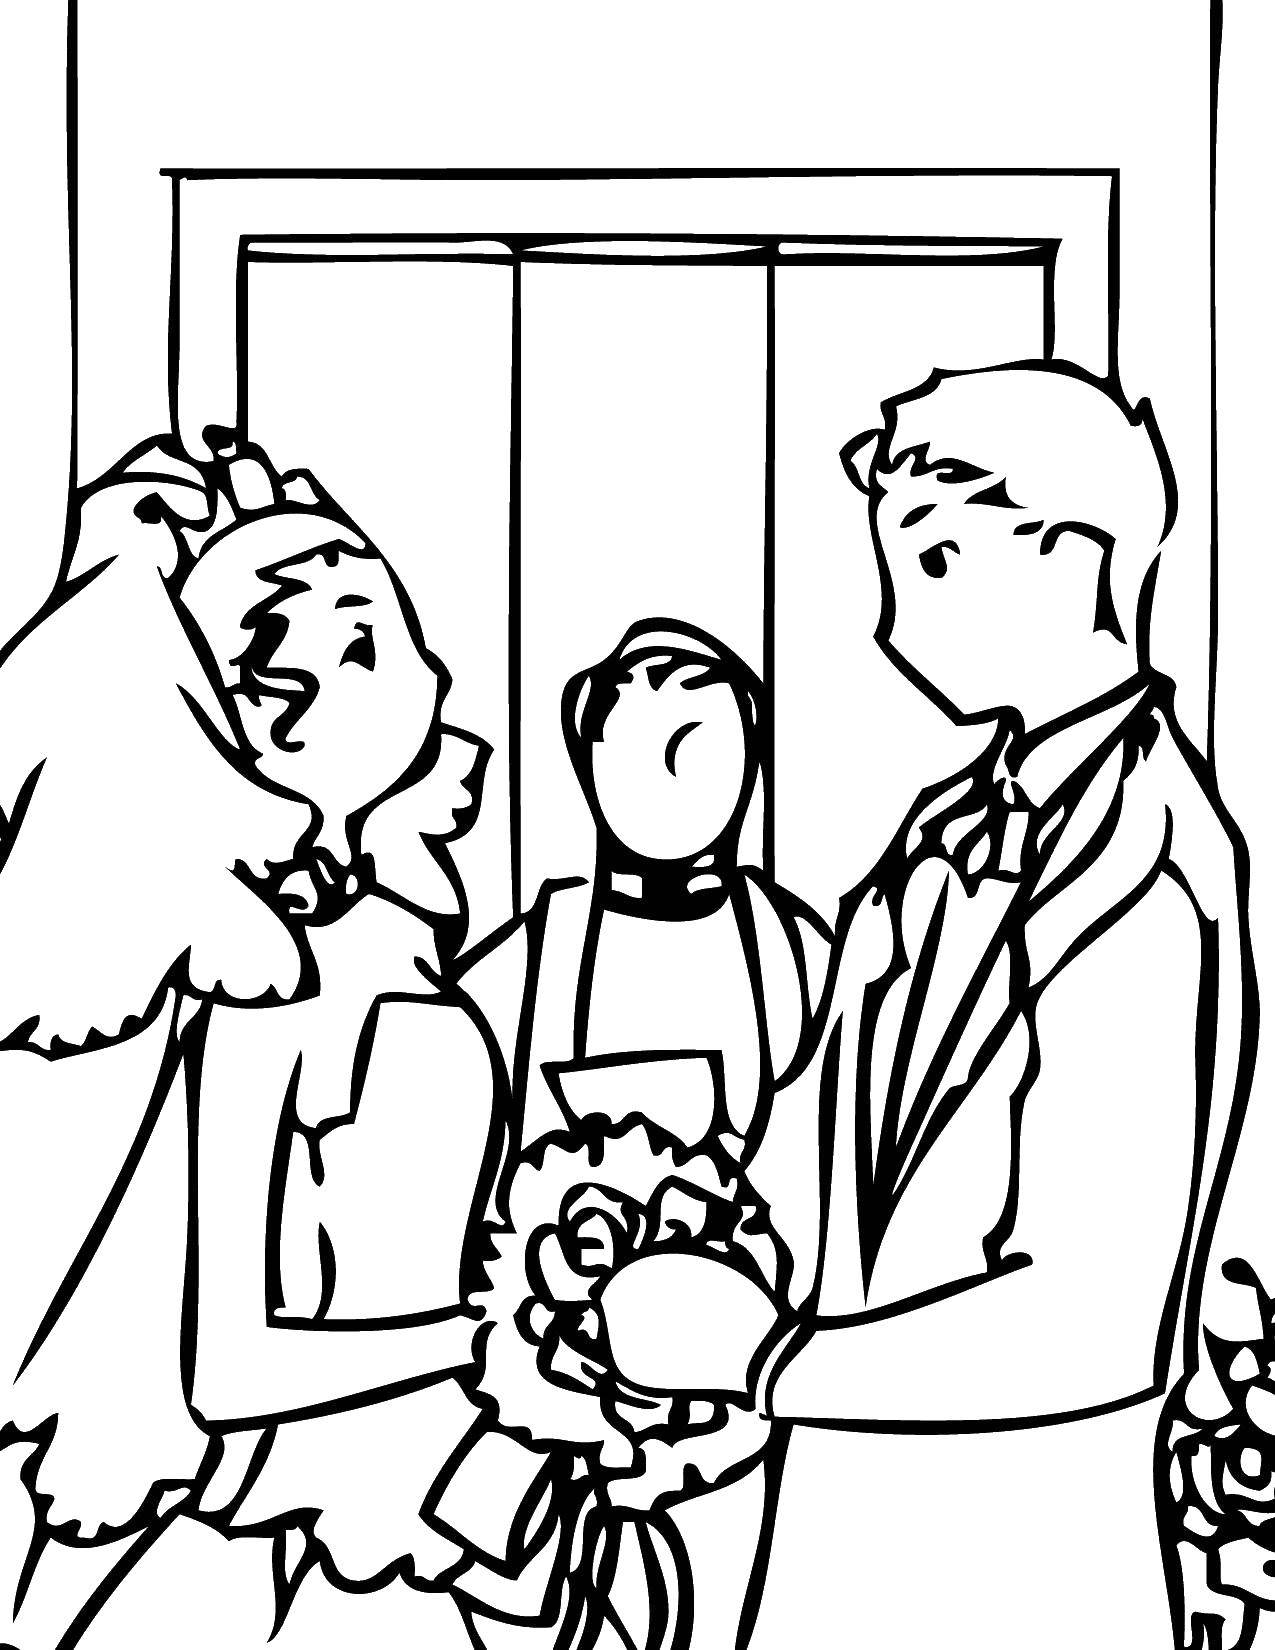 Coloring The priest and the bride and groom. Category Wedding. Tags:  the priest, groom, bride, bouquet.